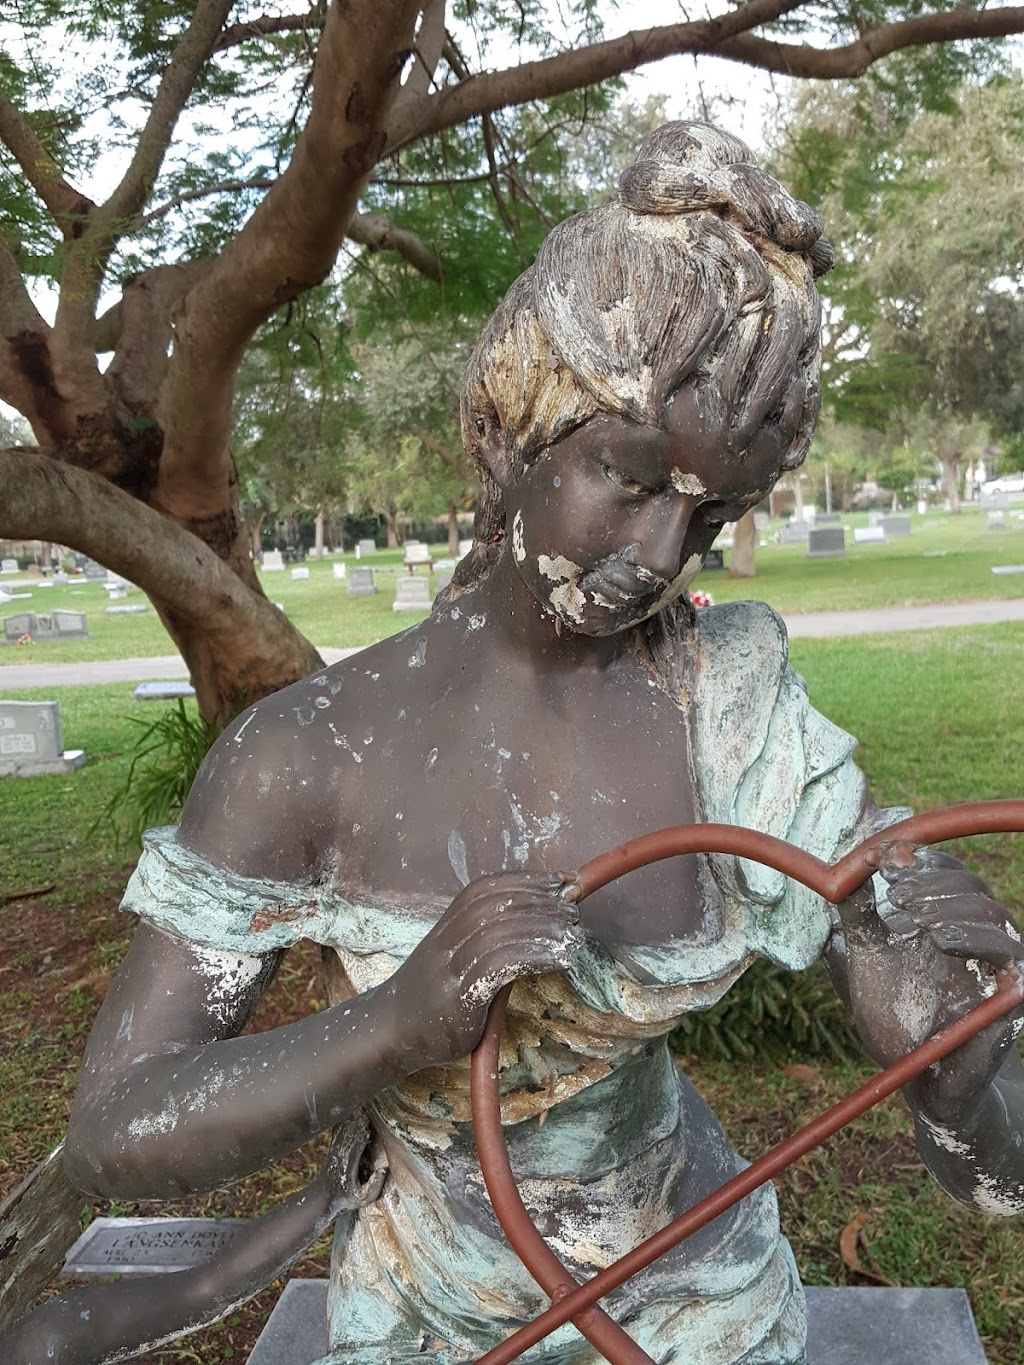 Evergreen Cemetery | 1300 SE 10th Ave, Fort Lauderdale, FL 33301, USA | Phone: (954) 828-7050